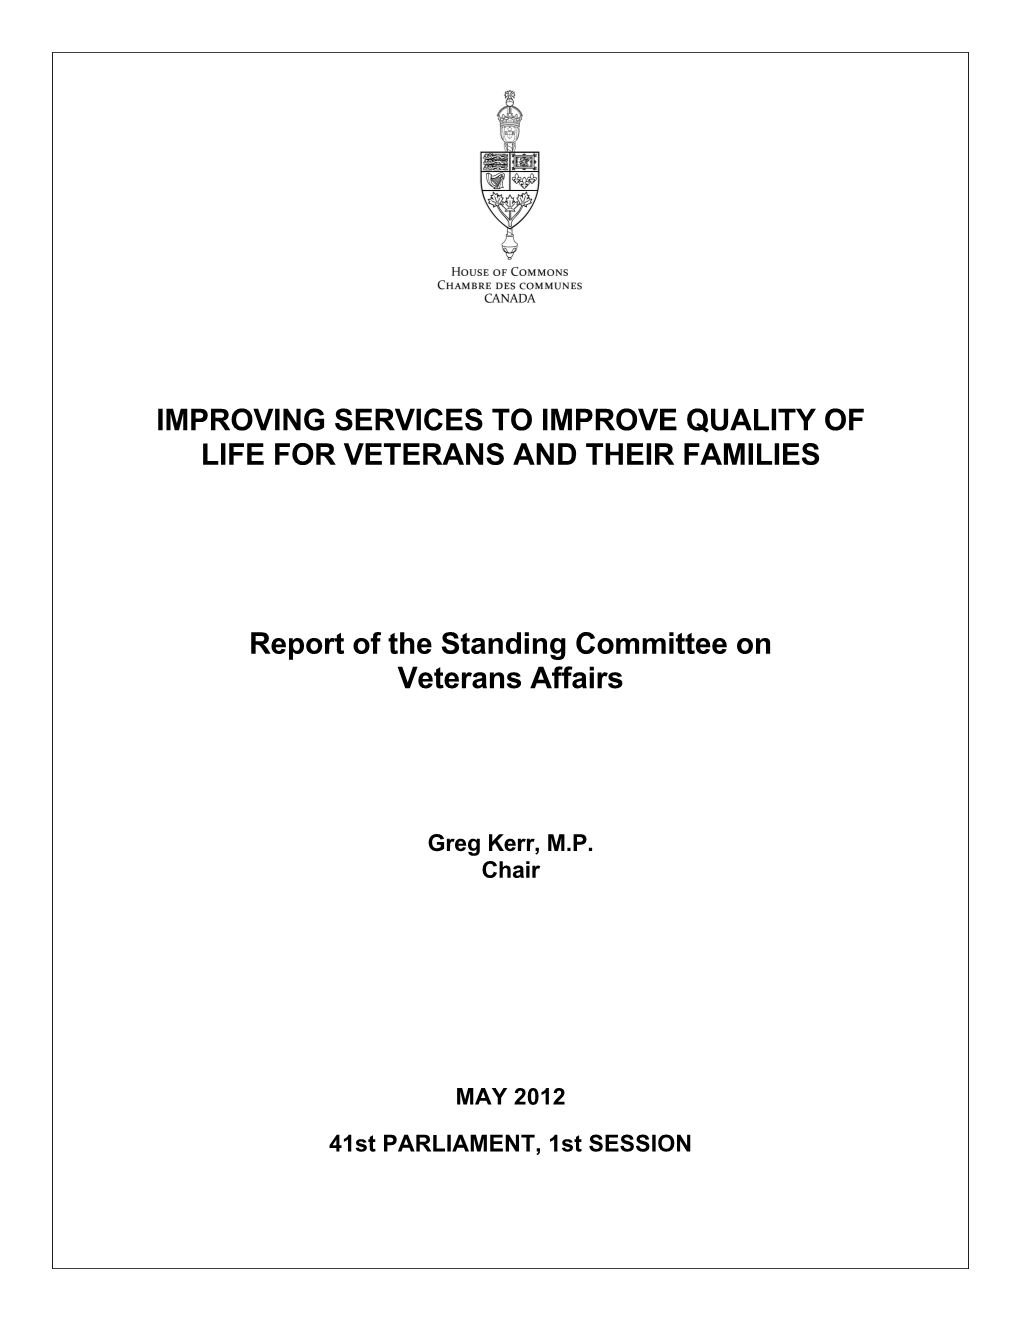 Improving Services to Improve Quality of Life for Veterans and Their Families